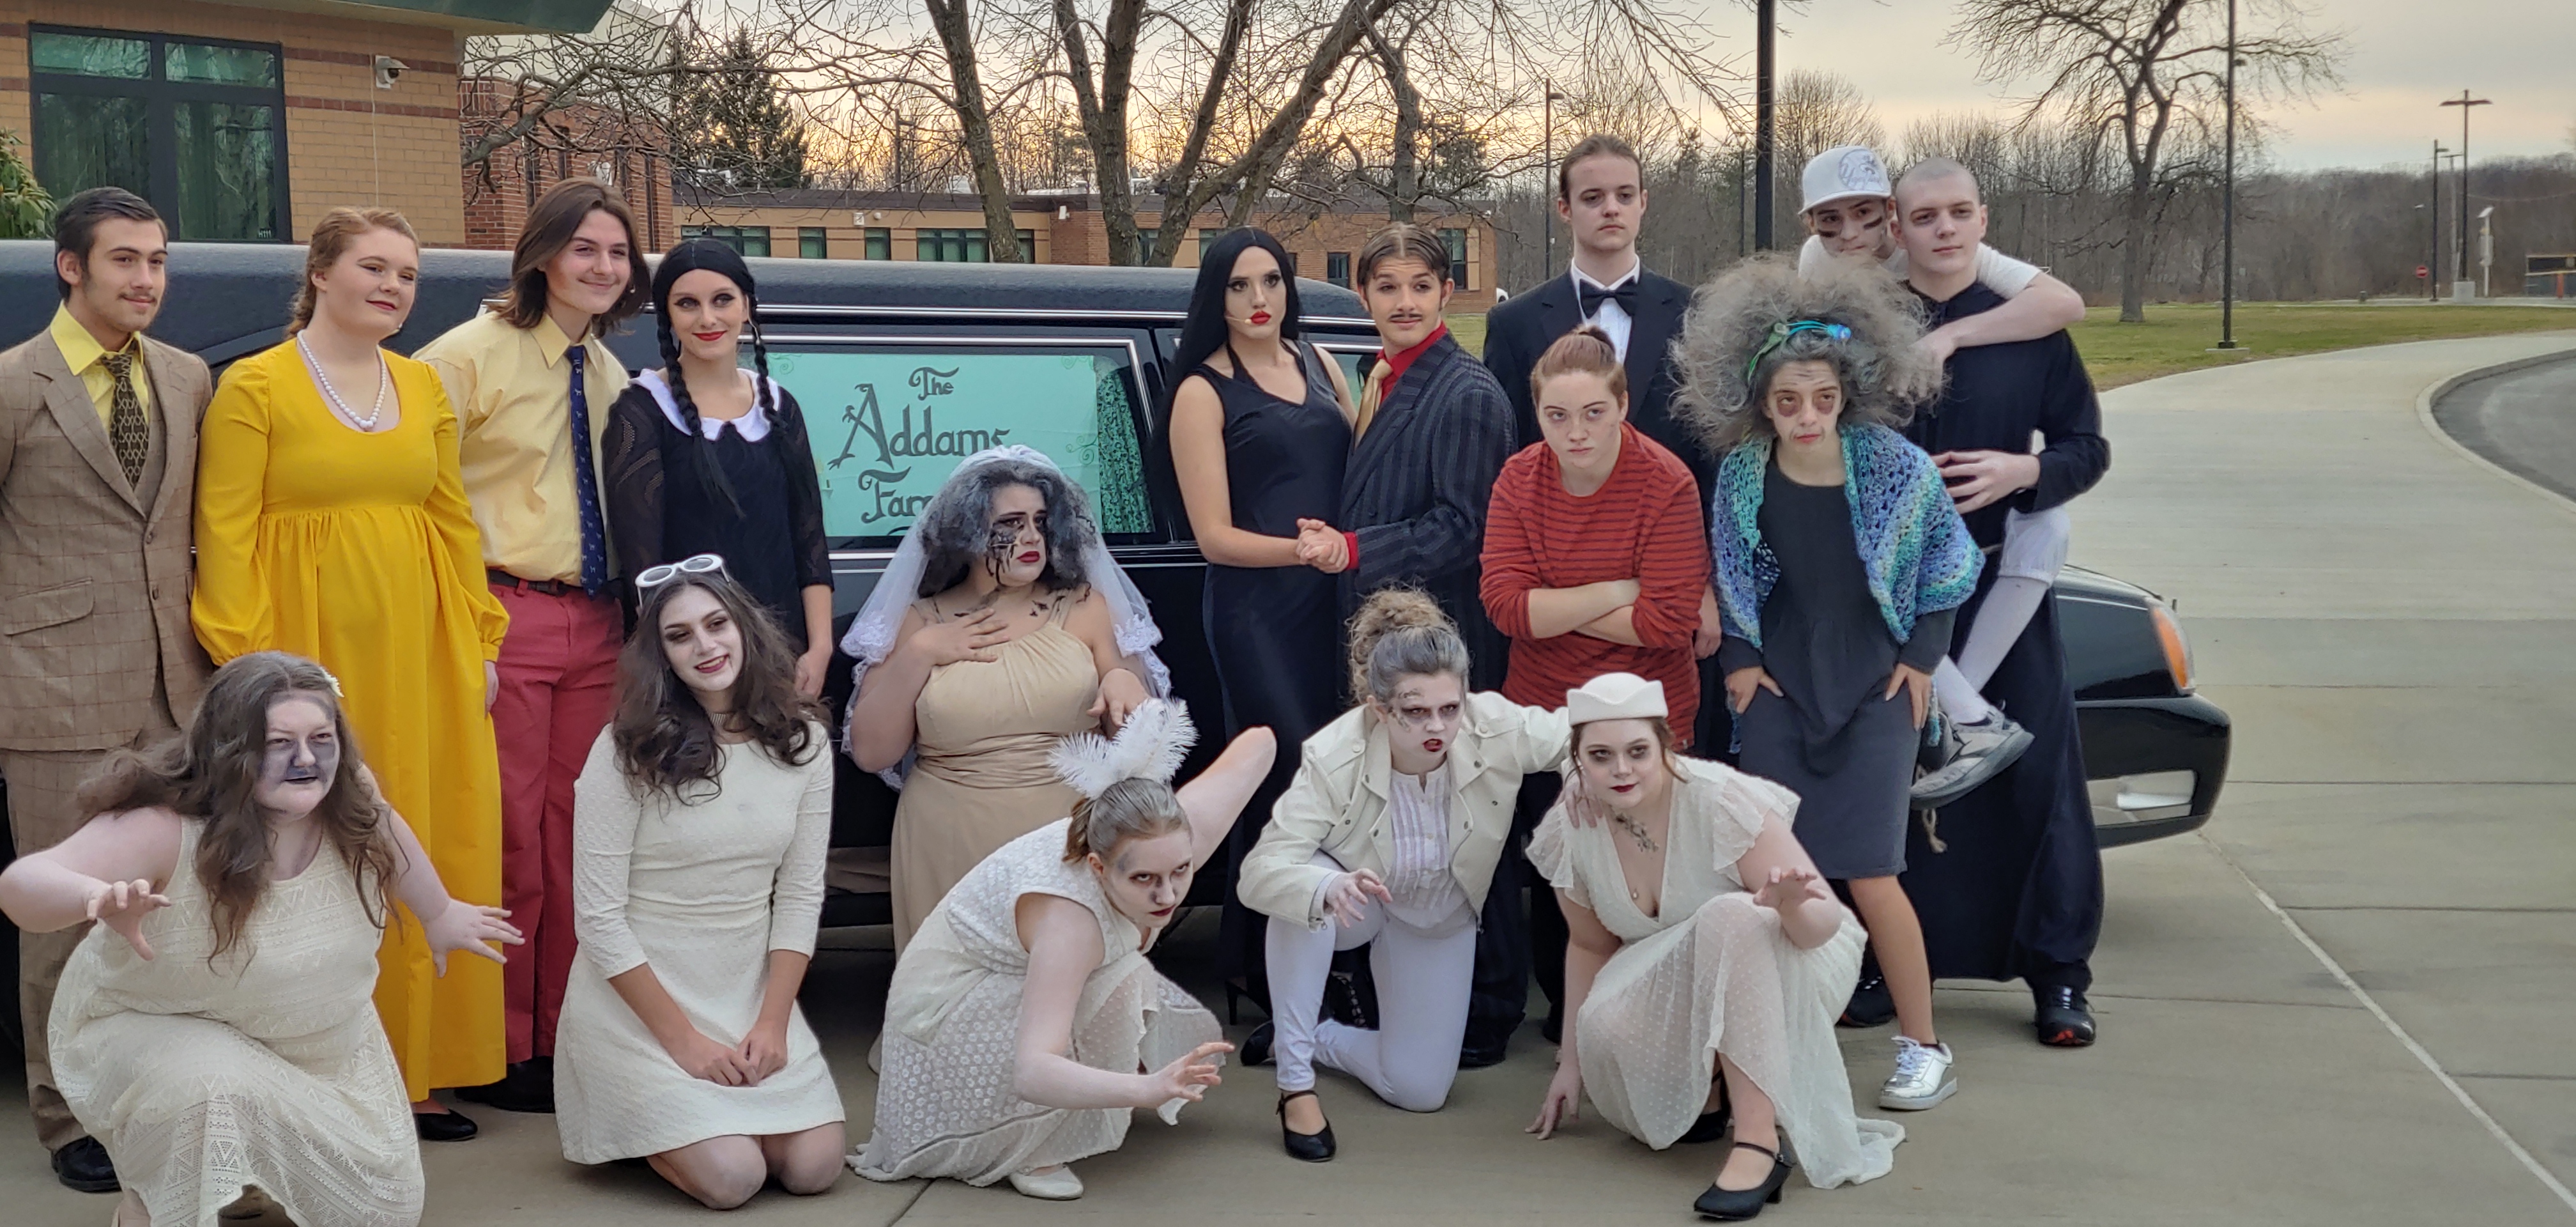 Cast of The Addams Family musical pose in costume in front of a hearse 